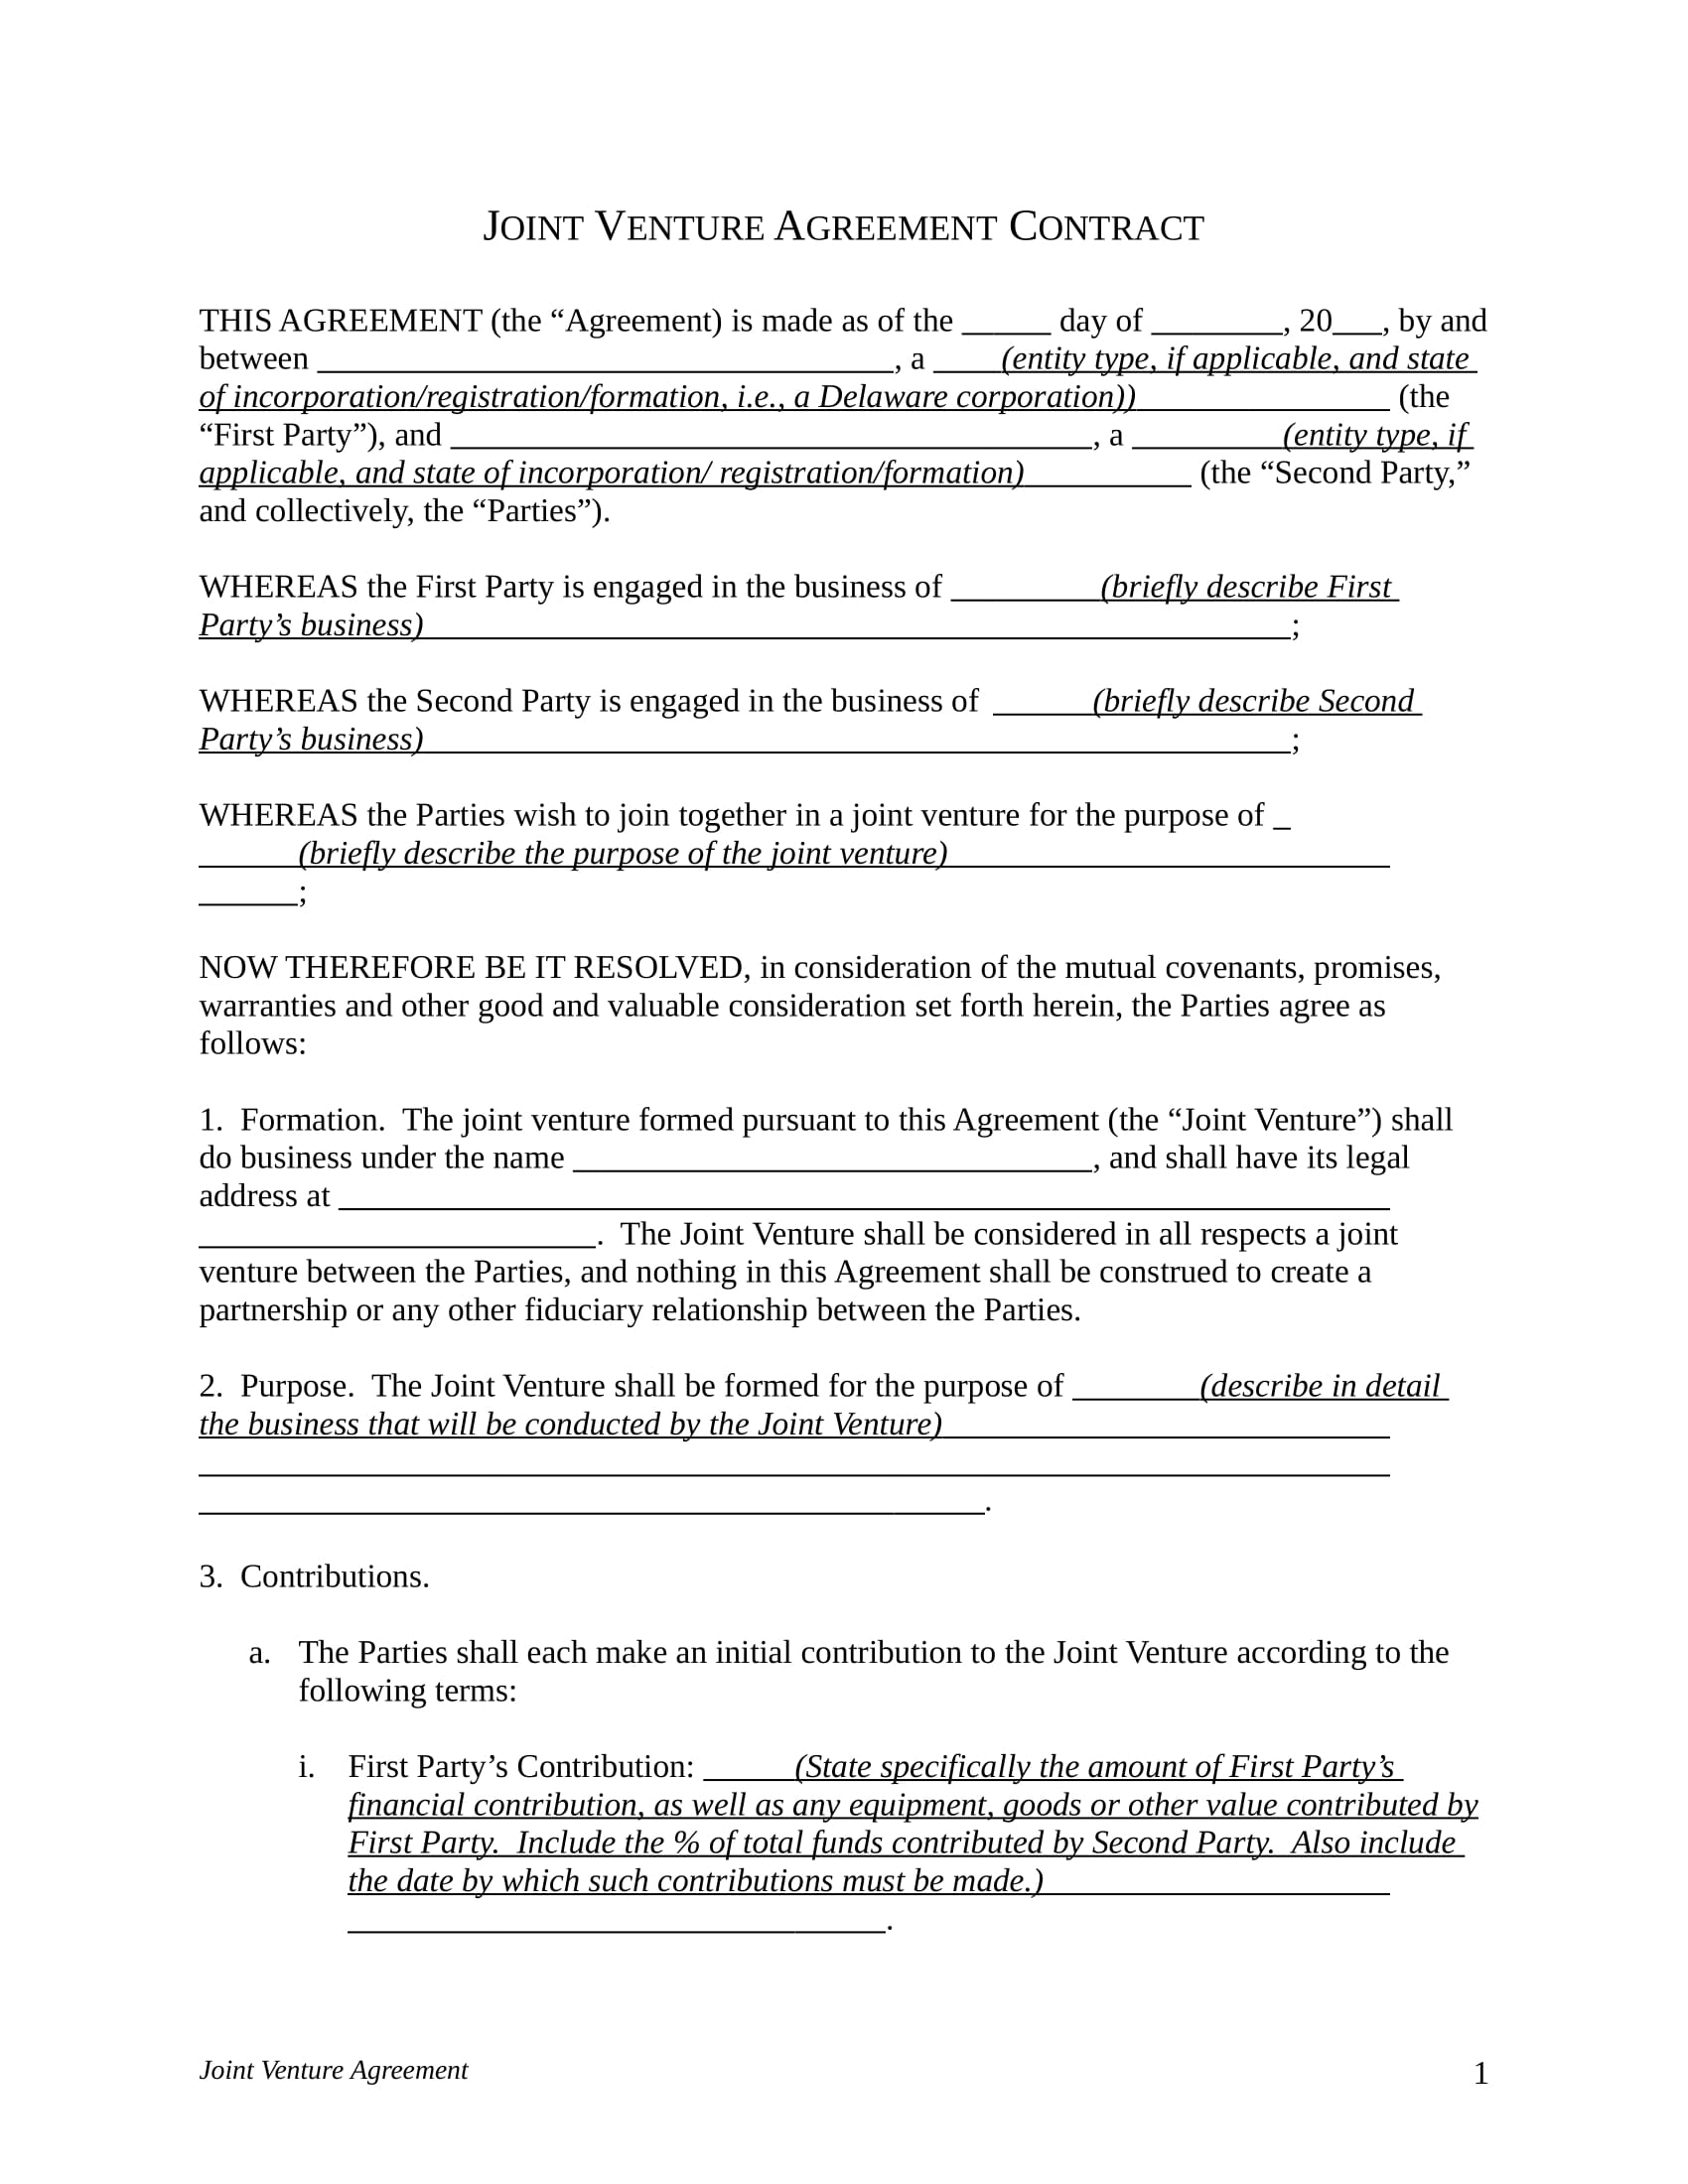 joint venture agreement contract form in doc 5